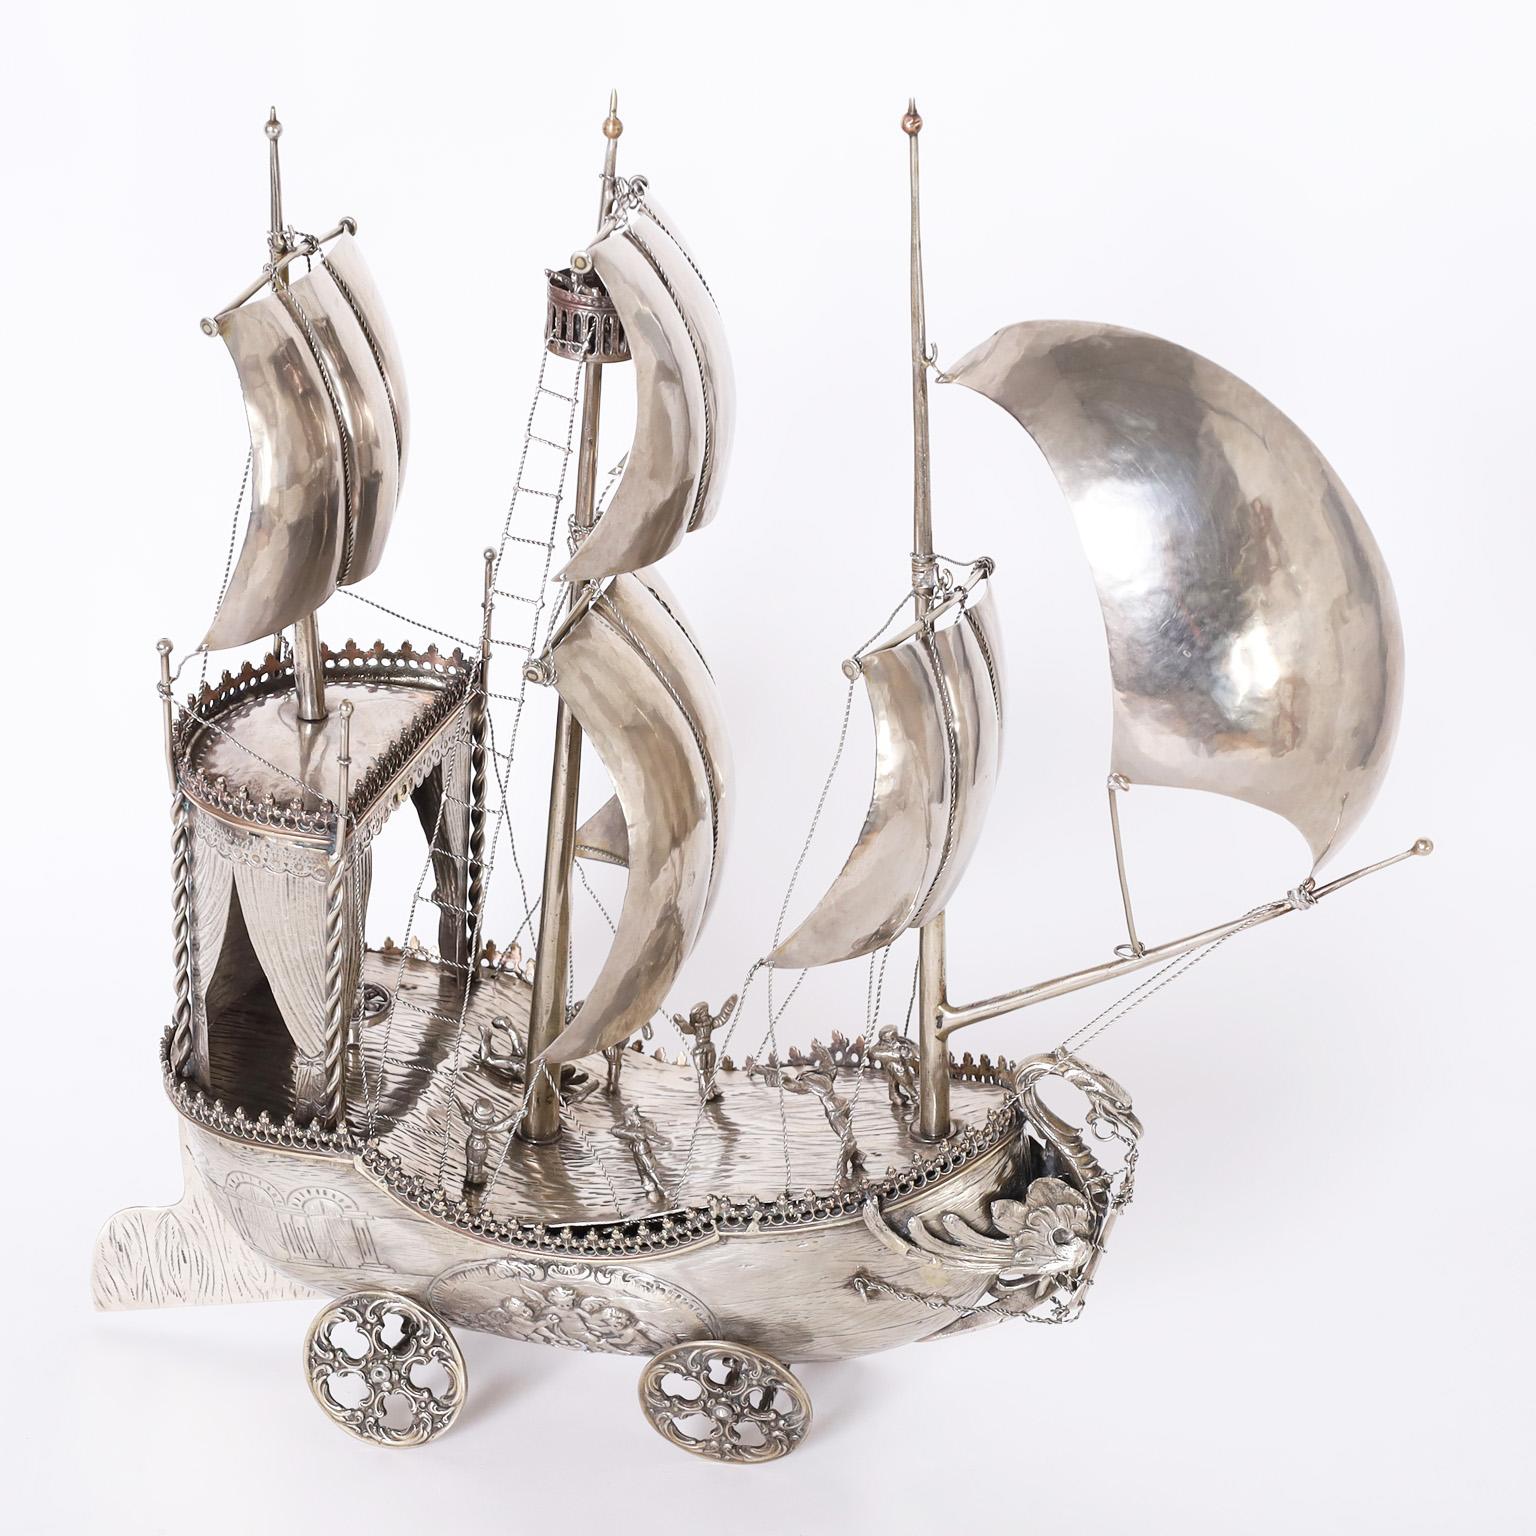 Enchanting antique sailing ship or nef hand crafted in silver plate on brass with plenty of unexpected details including hand hammered billowing sails, a crows nest, dramatic dragon figurehead, busy sailors embossed putis, and chariot style wheels.